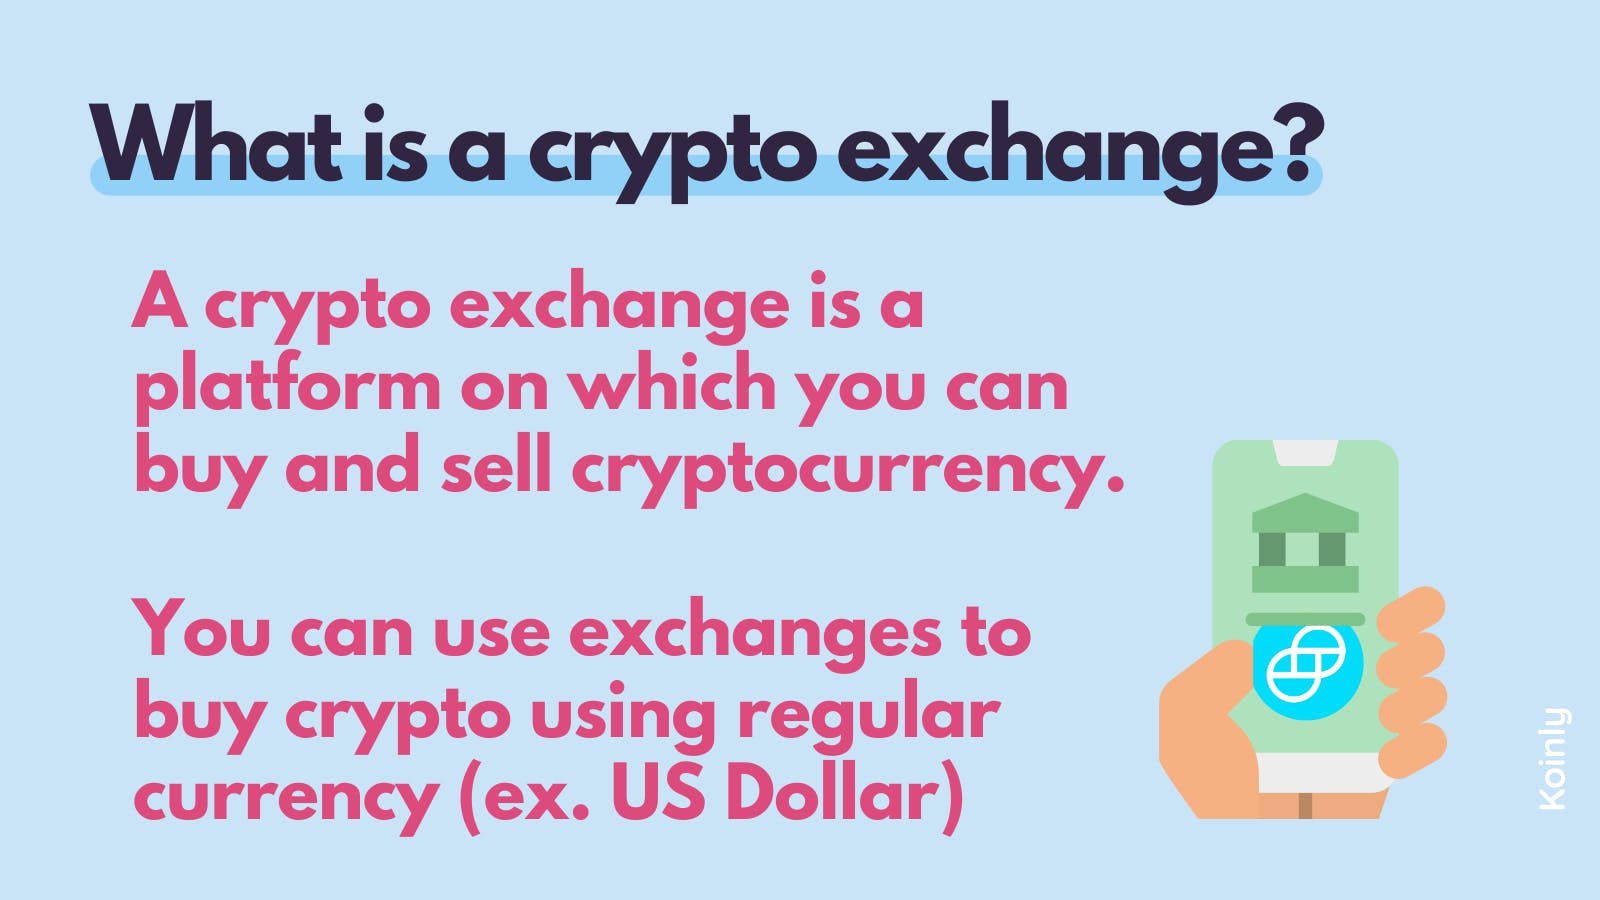 What is a crypto exchange?